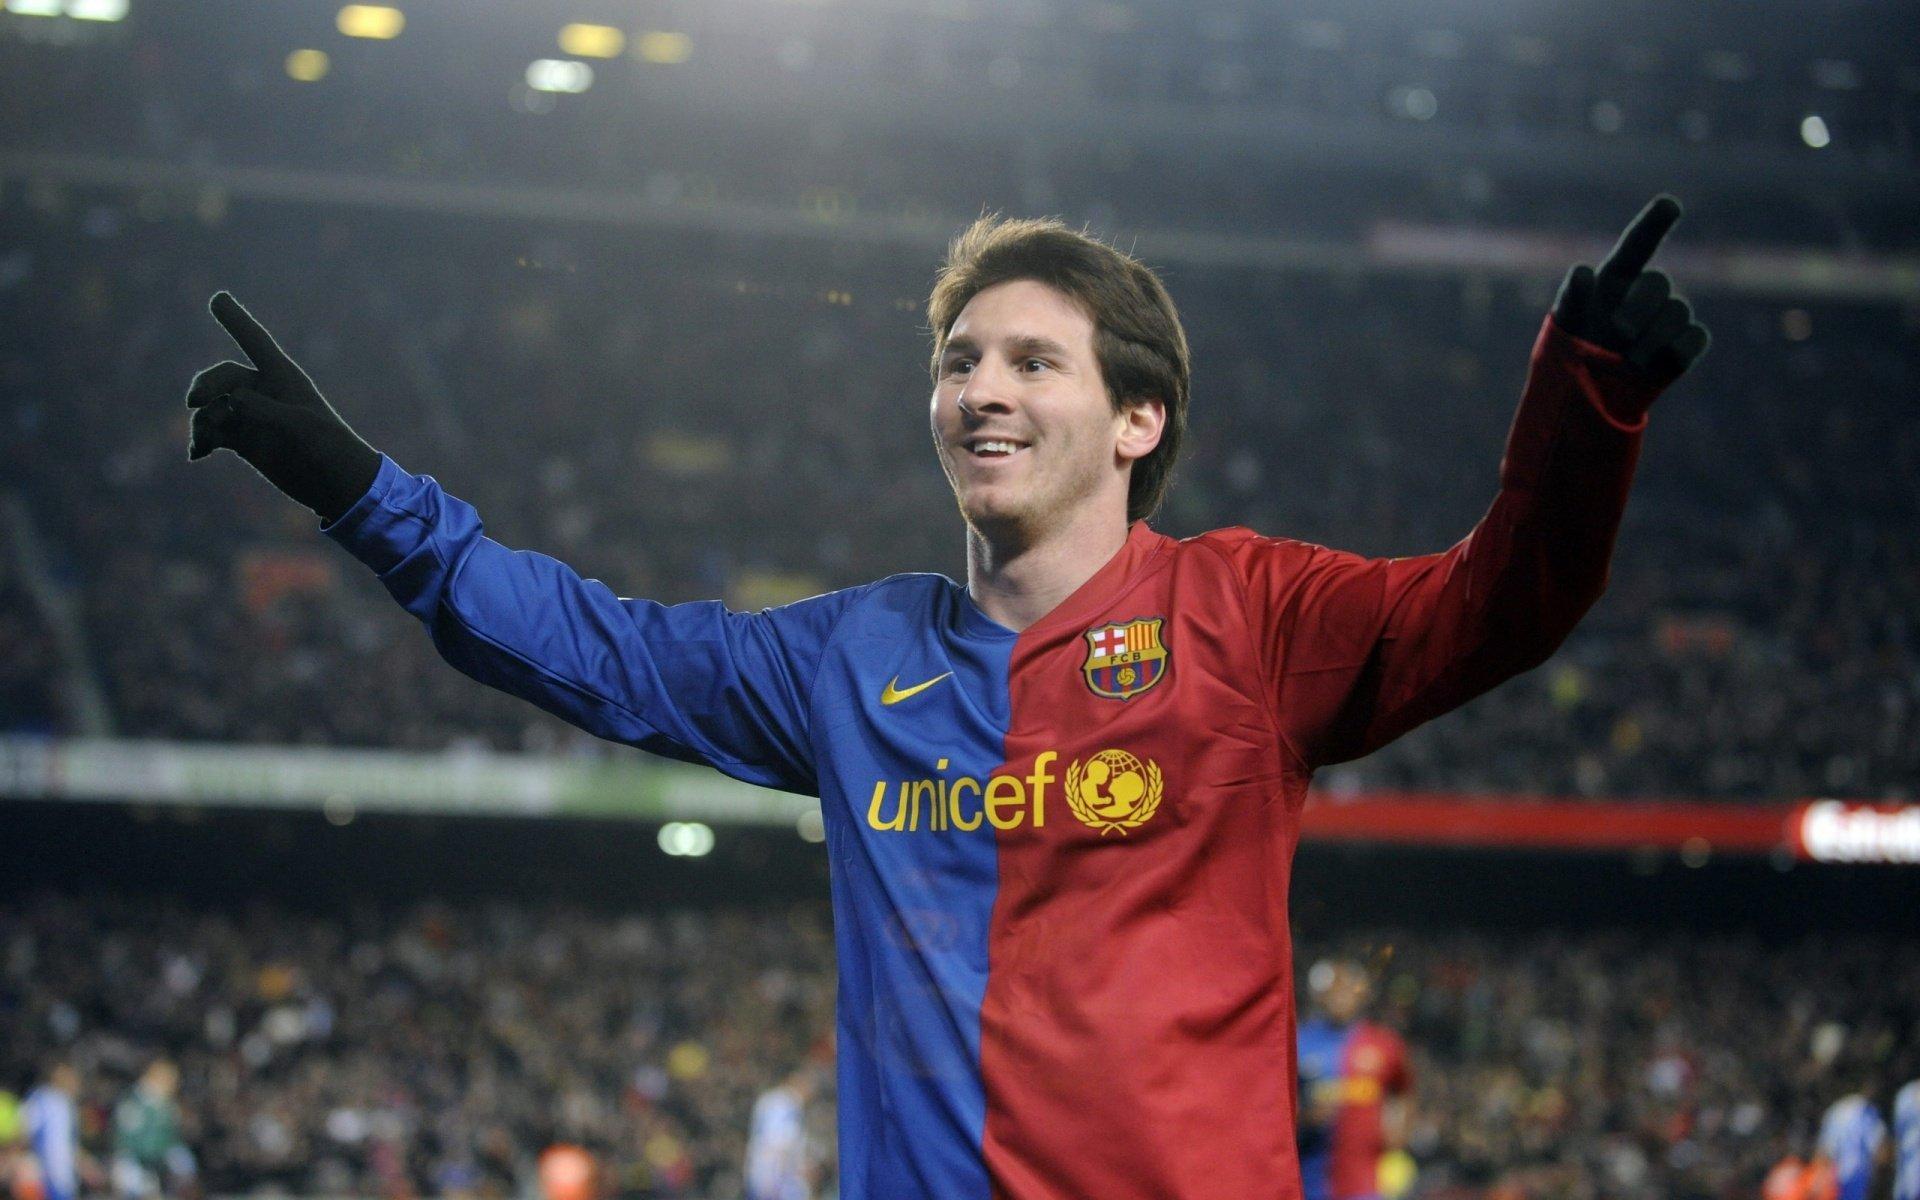 Lionel Messi Wallpaper Download High Quality HD Image of Messi